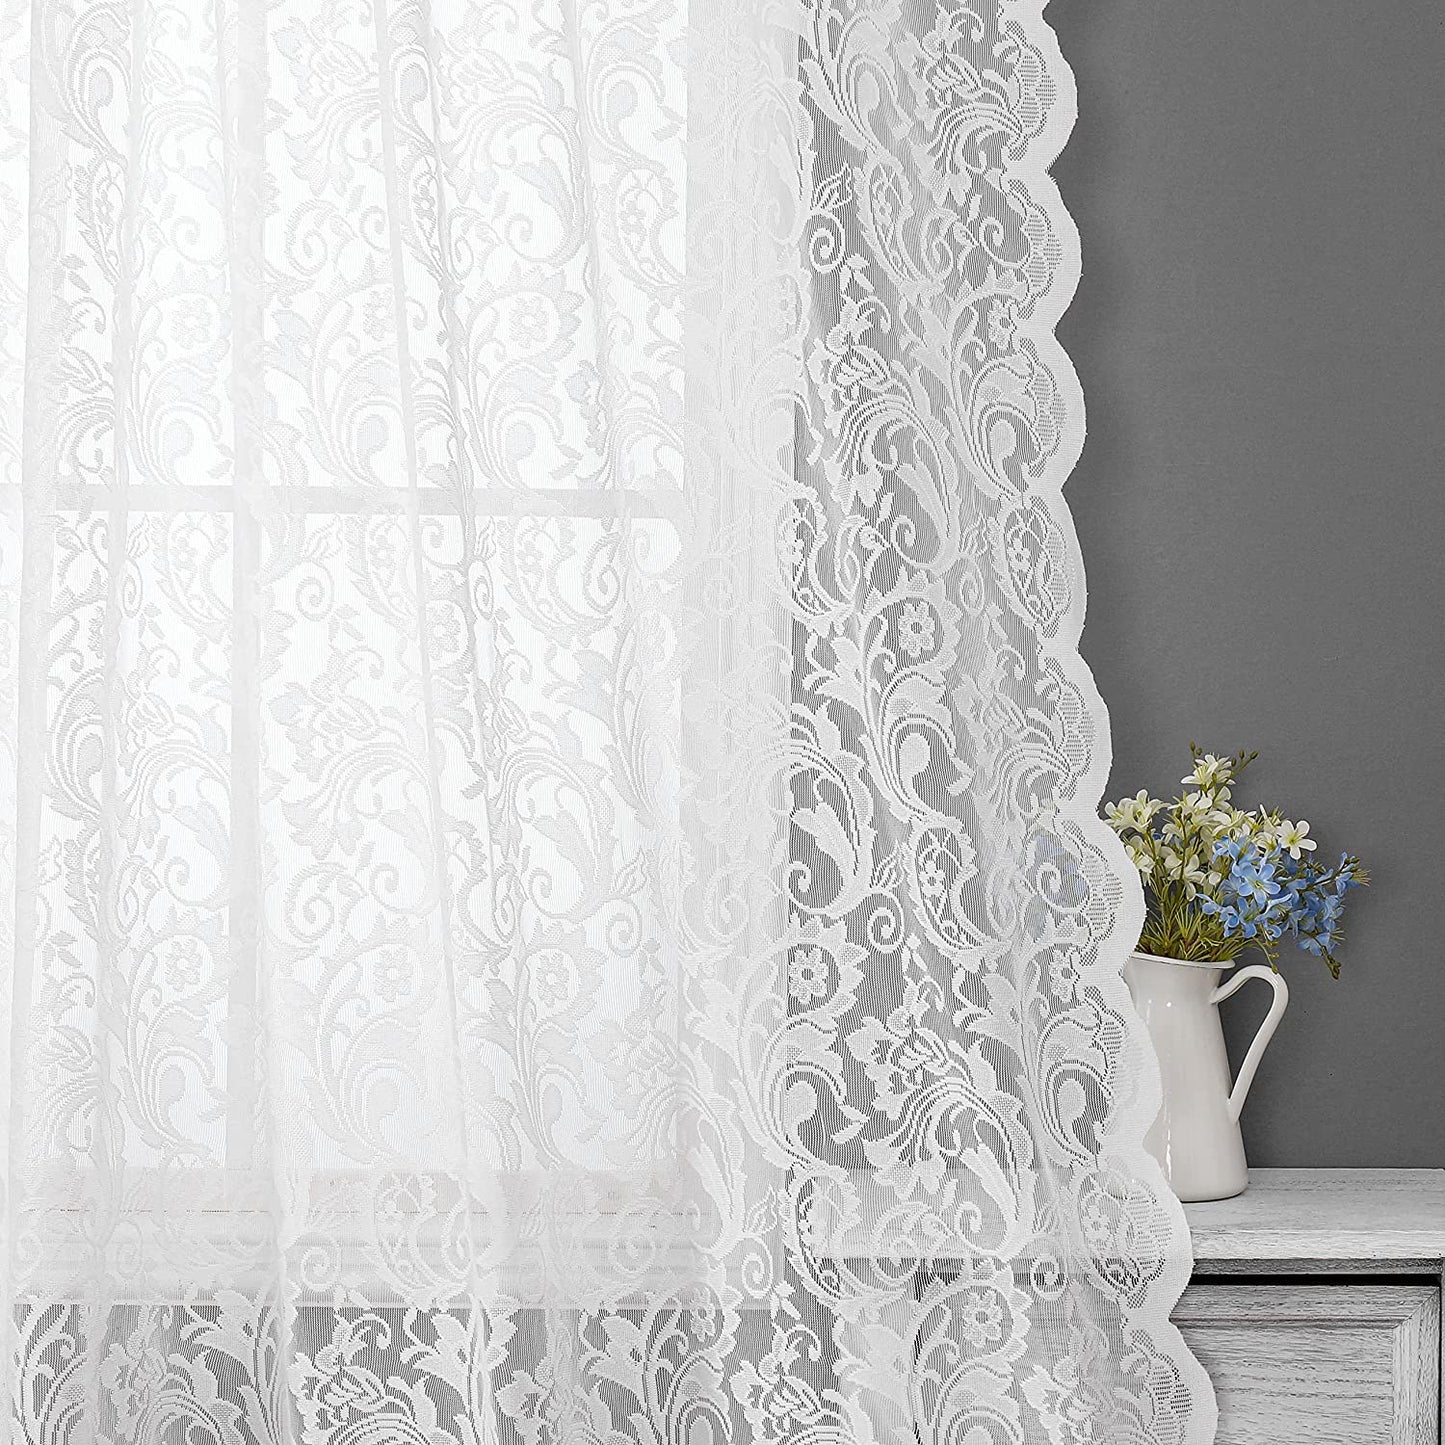 Black Sheer Lace Curtains 84 Inch Vintage Floral Sheer Gothic Curtain Panels for Living Room Bedroom Luxury Light Filtering Drapes Black Window Treatment Sets Rod Pocket 2 Panels 54" Wx84 L  Bujasso Rod Pocket White 54"X63"X2 